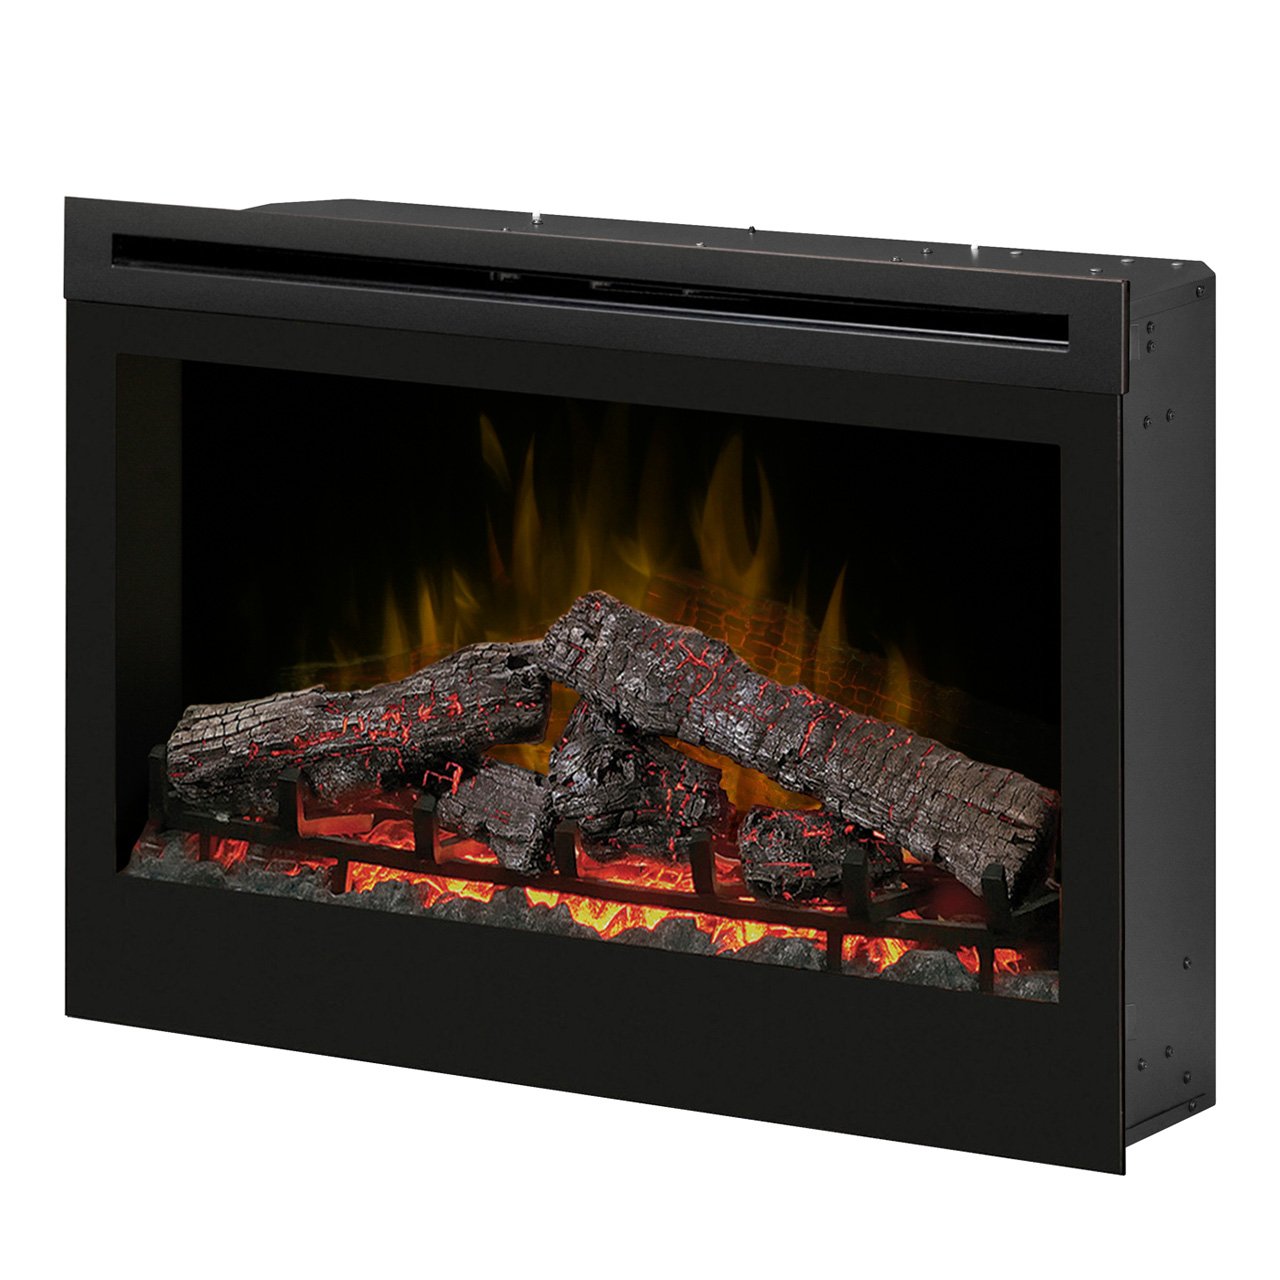 Fireplace Space Heater Lovely Dimplex Df3033st 33 Inch Self Trimming Electric Fireplace Insert